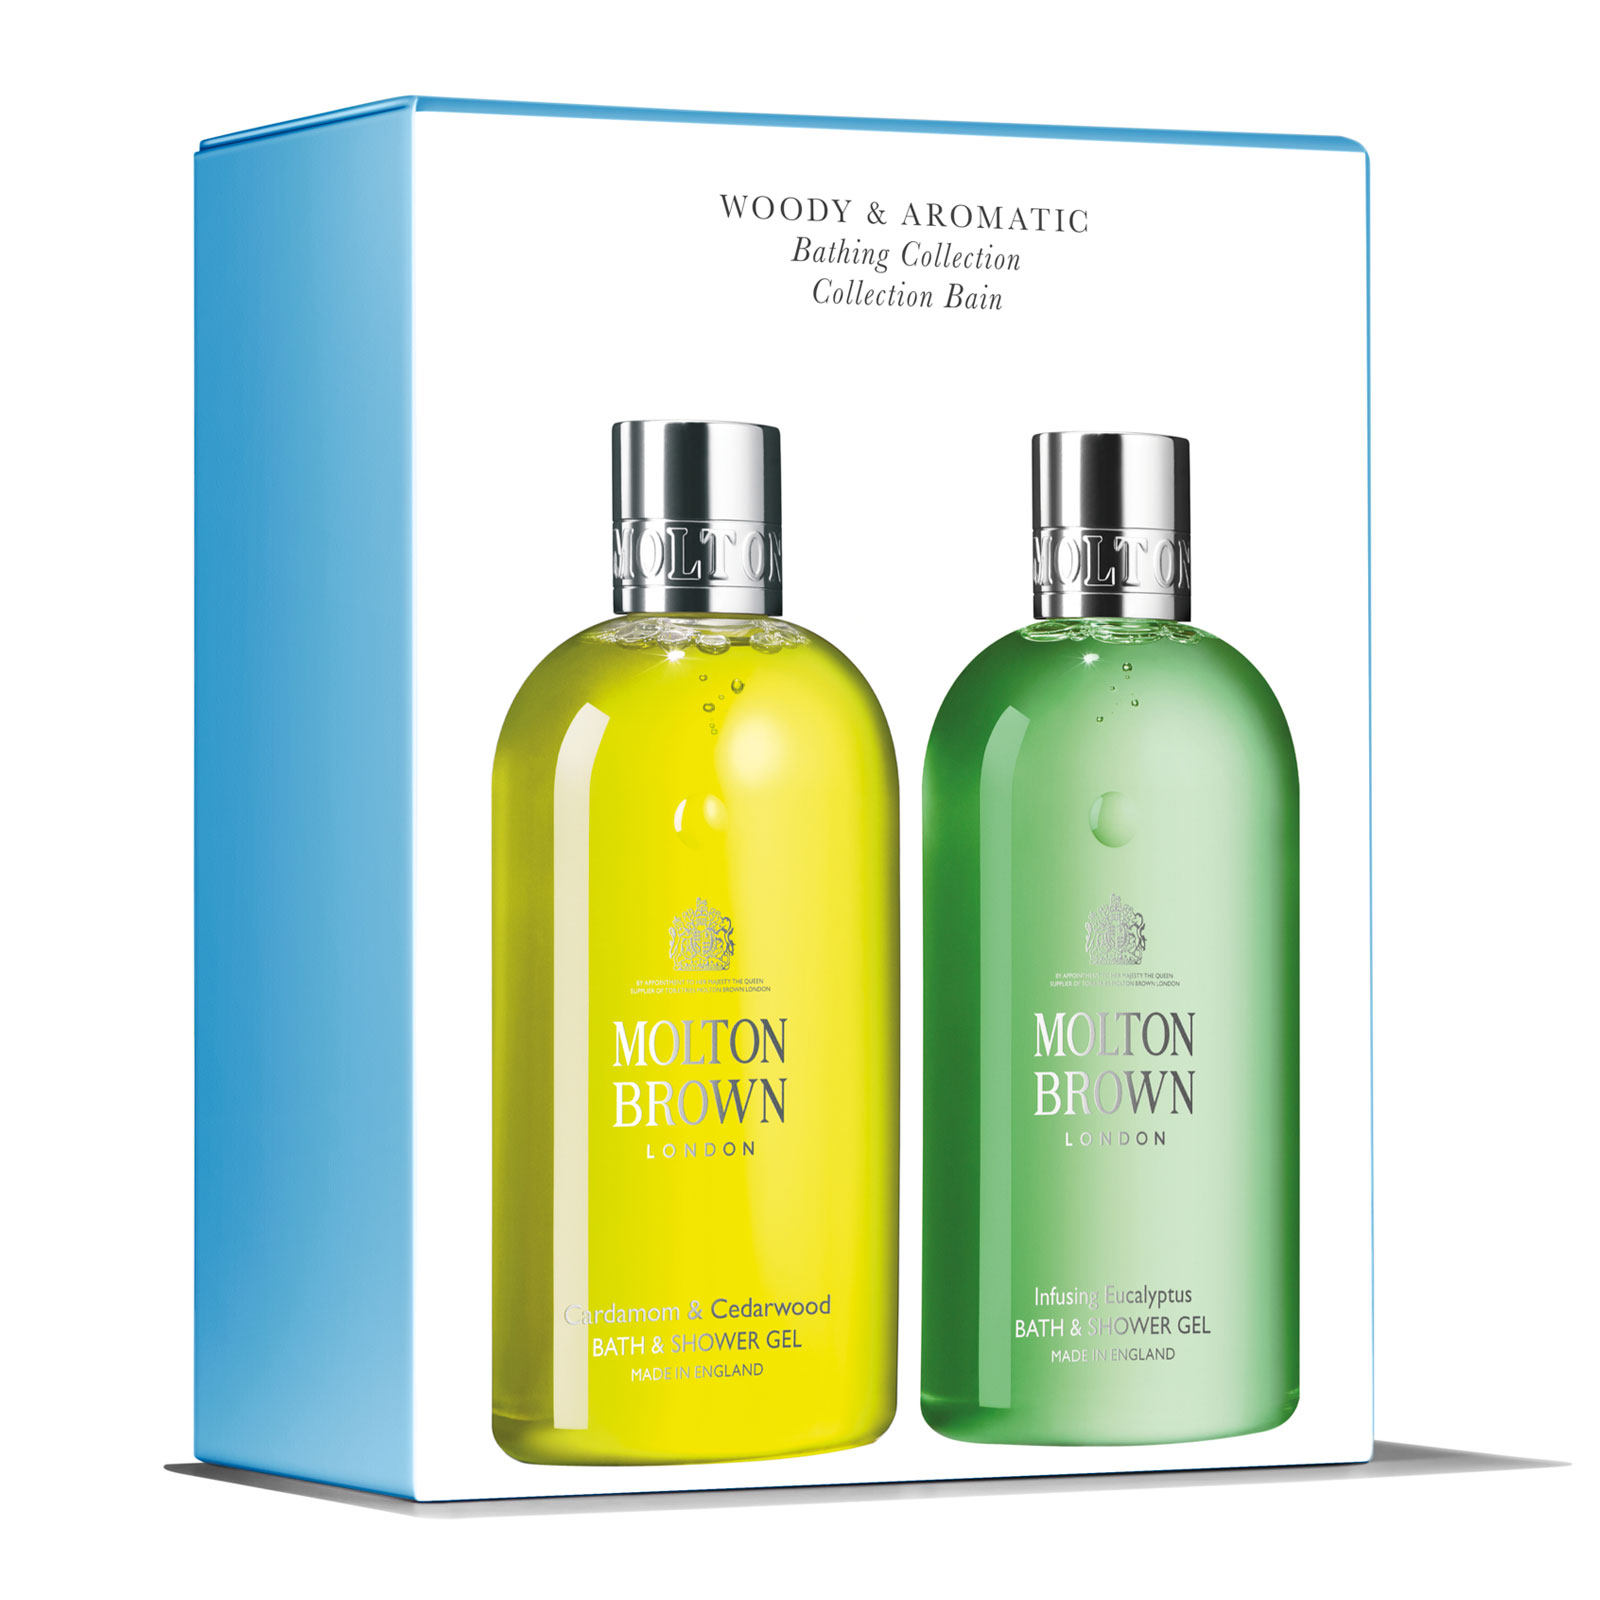 Molton Brown Woody & Aromatic Bathing Collection